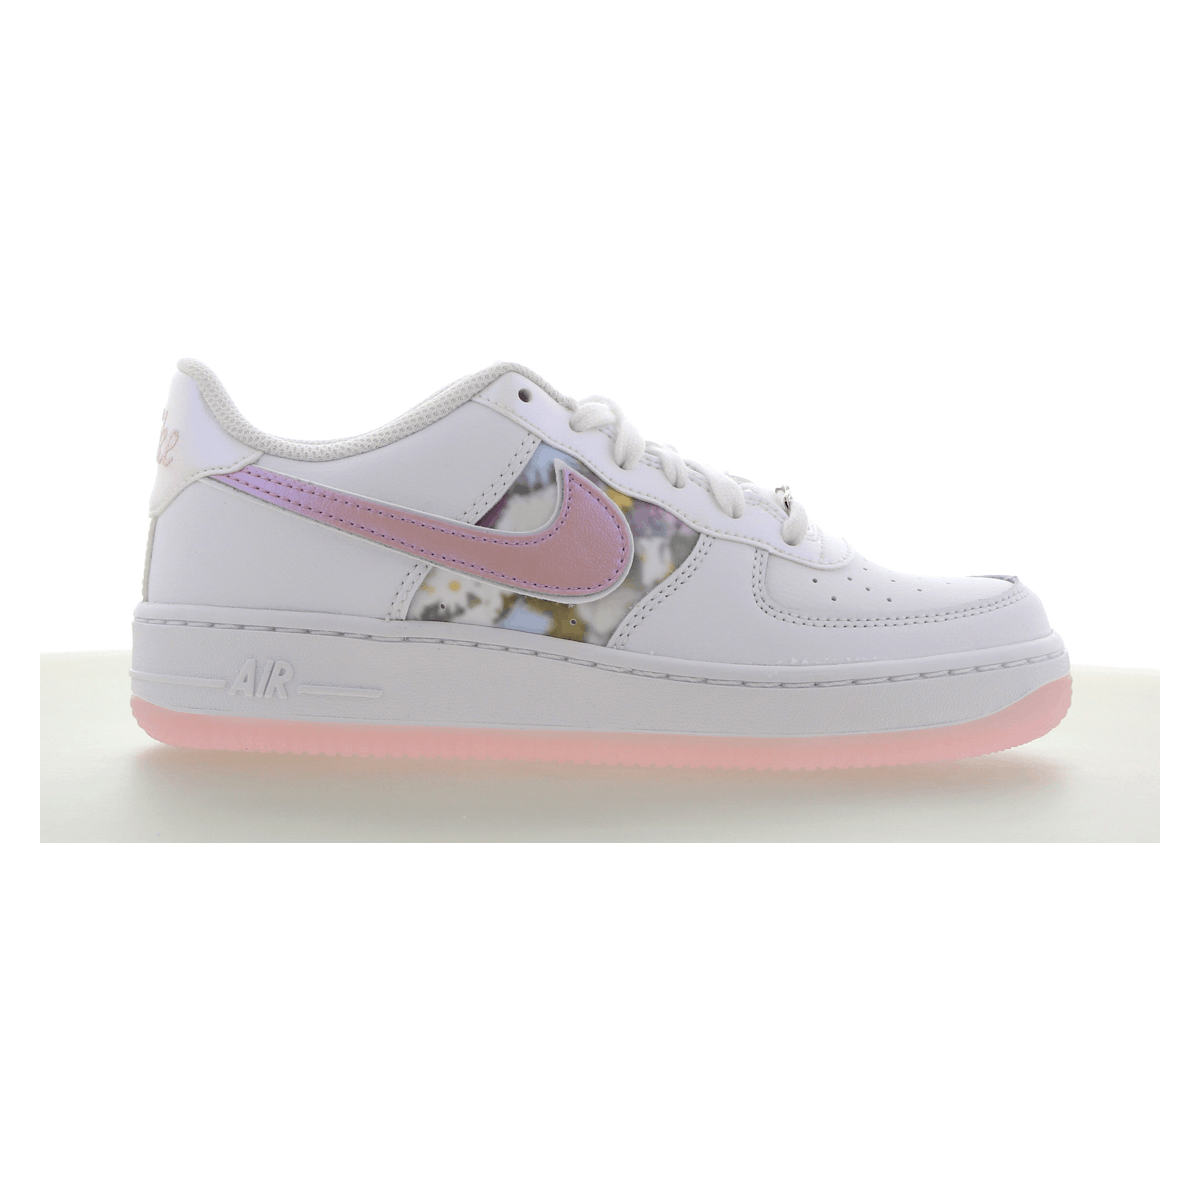 Nike Air Force 1 Low White Light Artic Pink (GS)